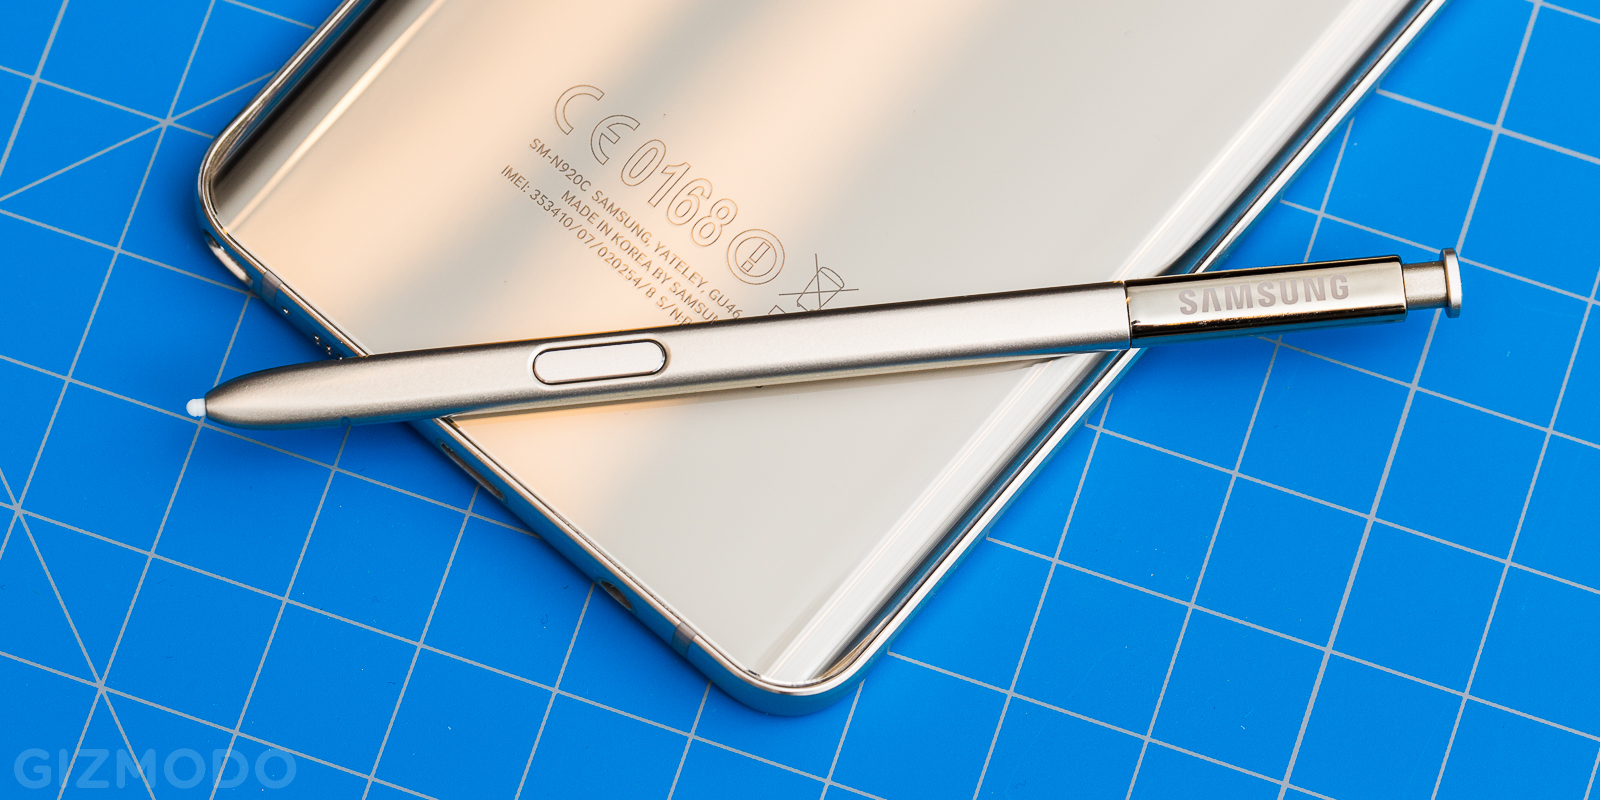 Samsung Galaxy Note 5 Review: The Best High-End Android Phone